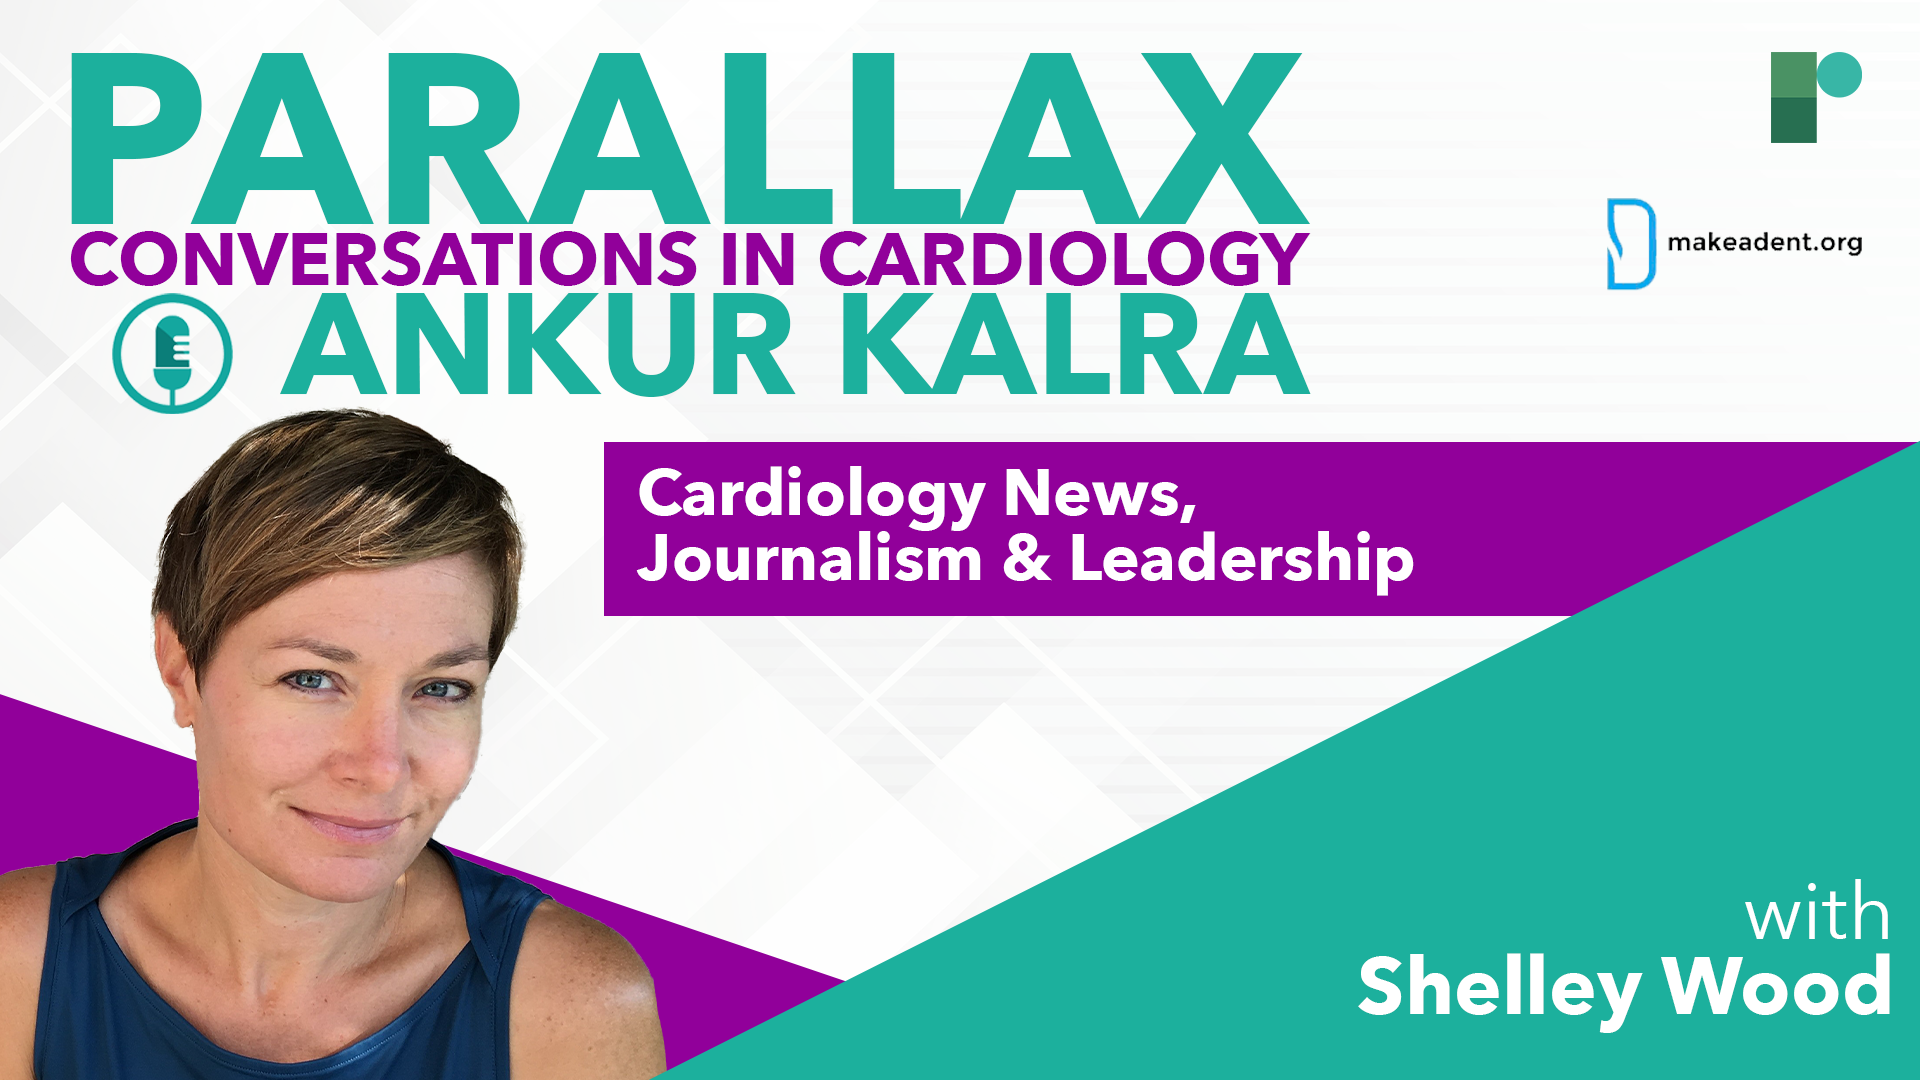 EP 71: Cardiology News, Journalism & Leadership with Shelley Wood